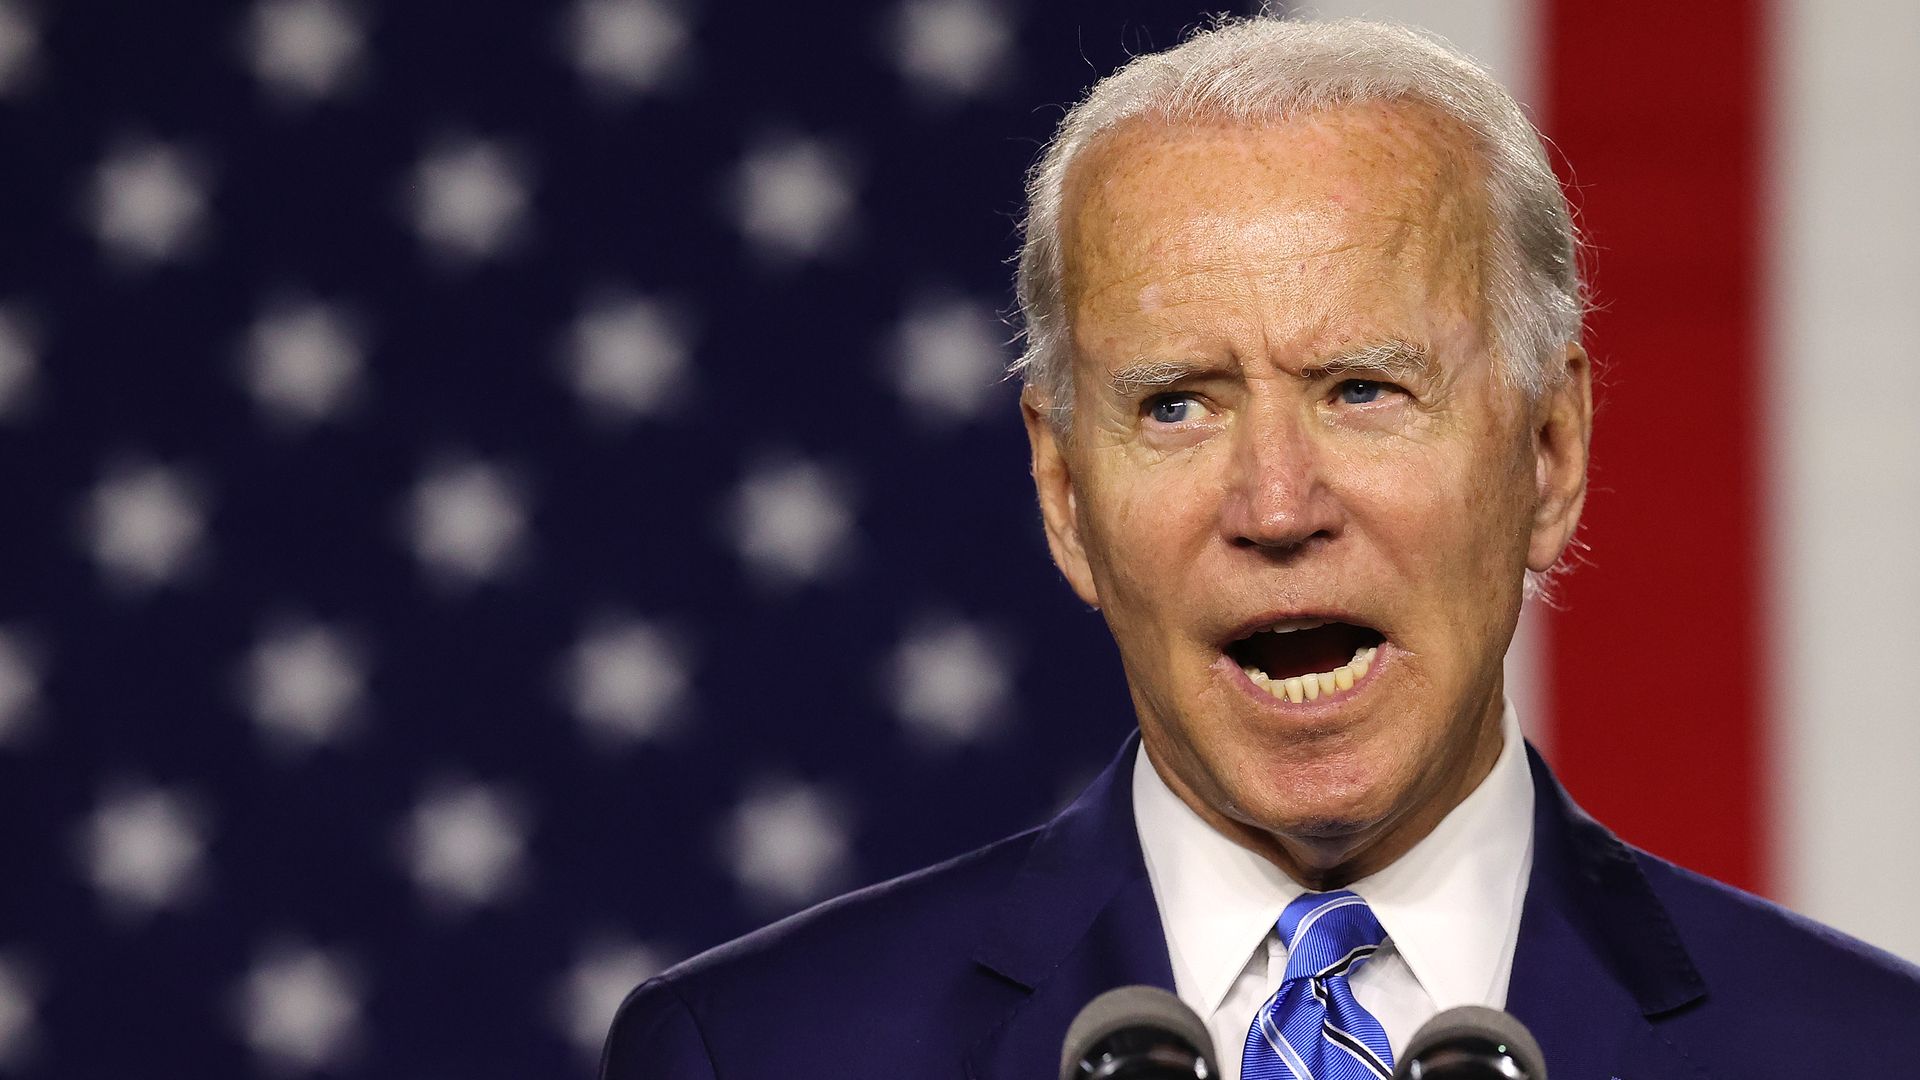 Democratic presidential candidate former Vice President Joe Biden speaks at the Chase Center July 14